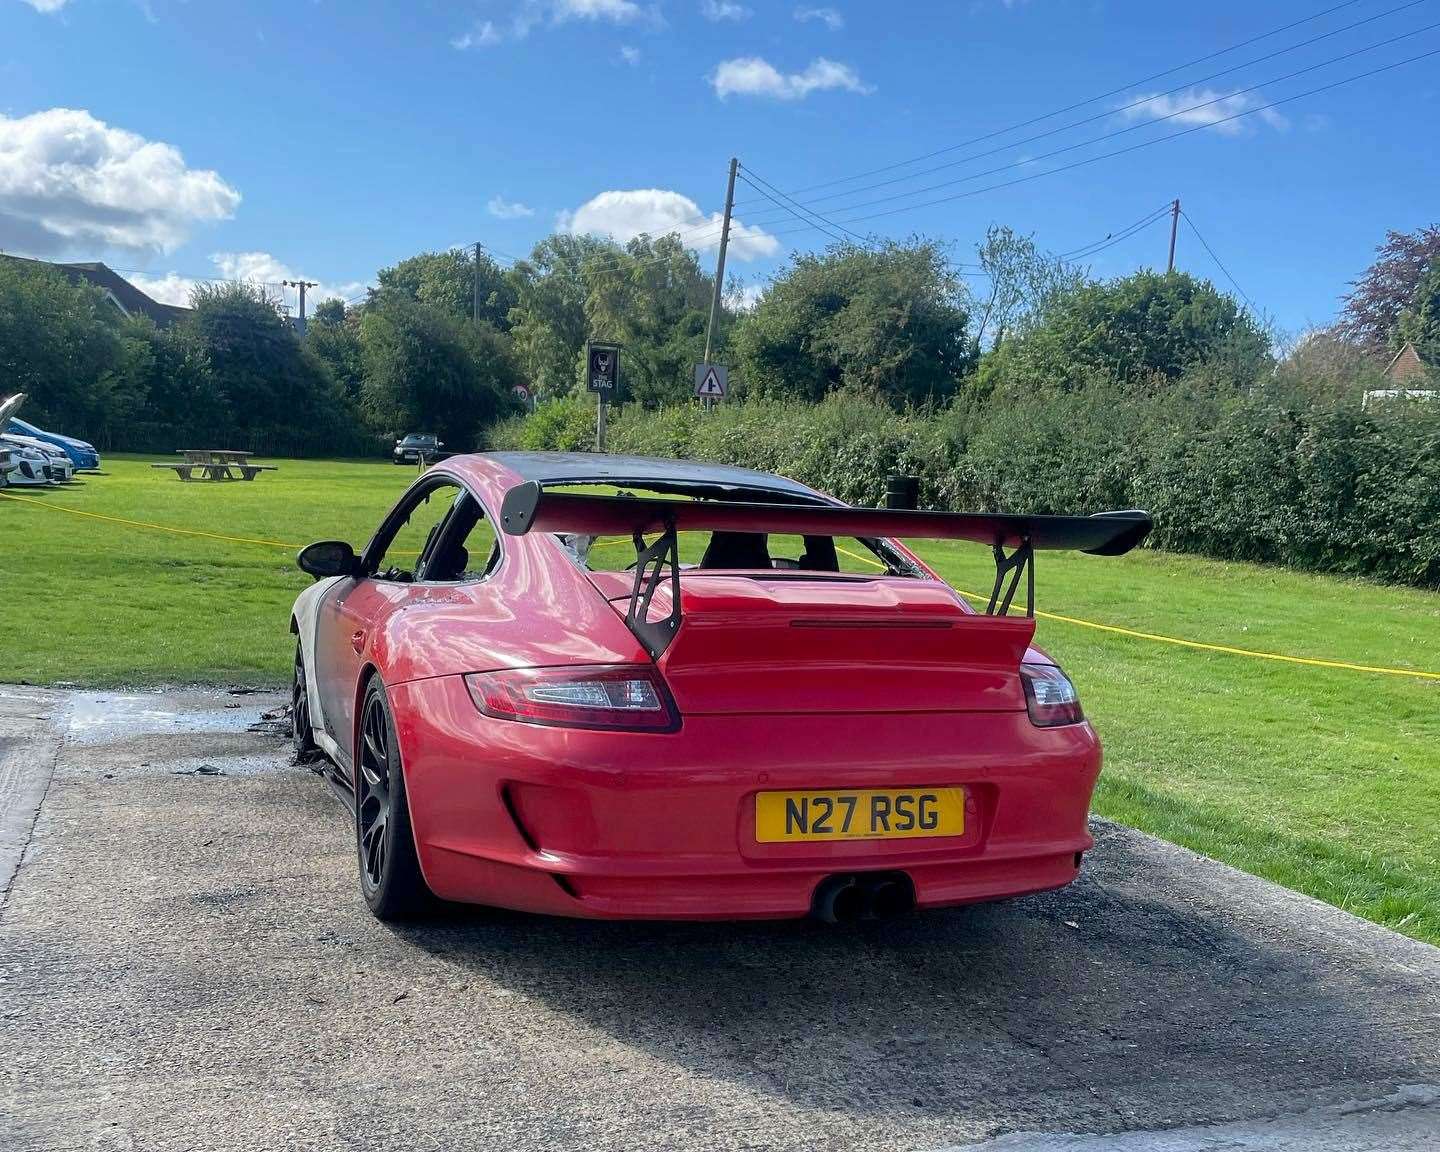 The Porsche 911 belongs to pub co-owner Roger Gray. Picture: Roger Gray